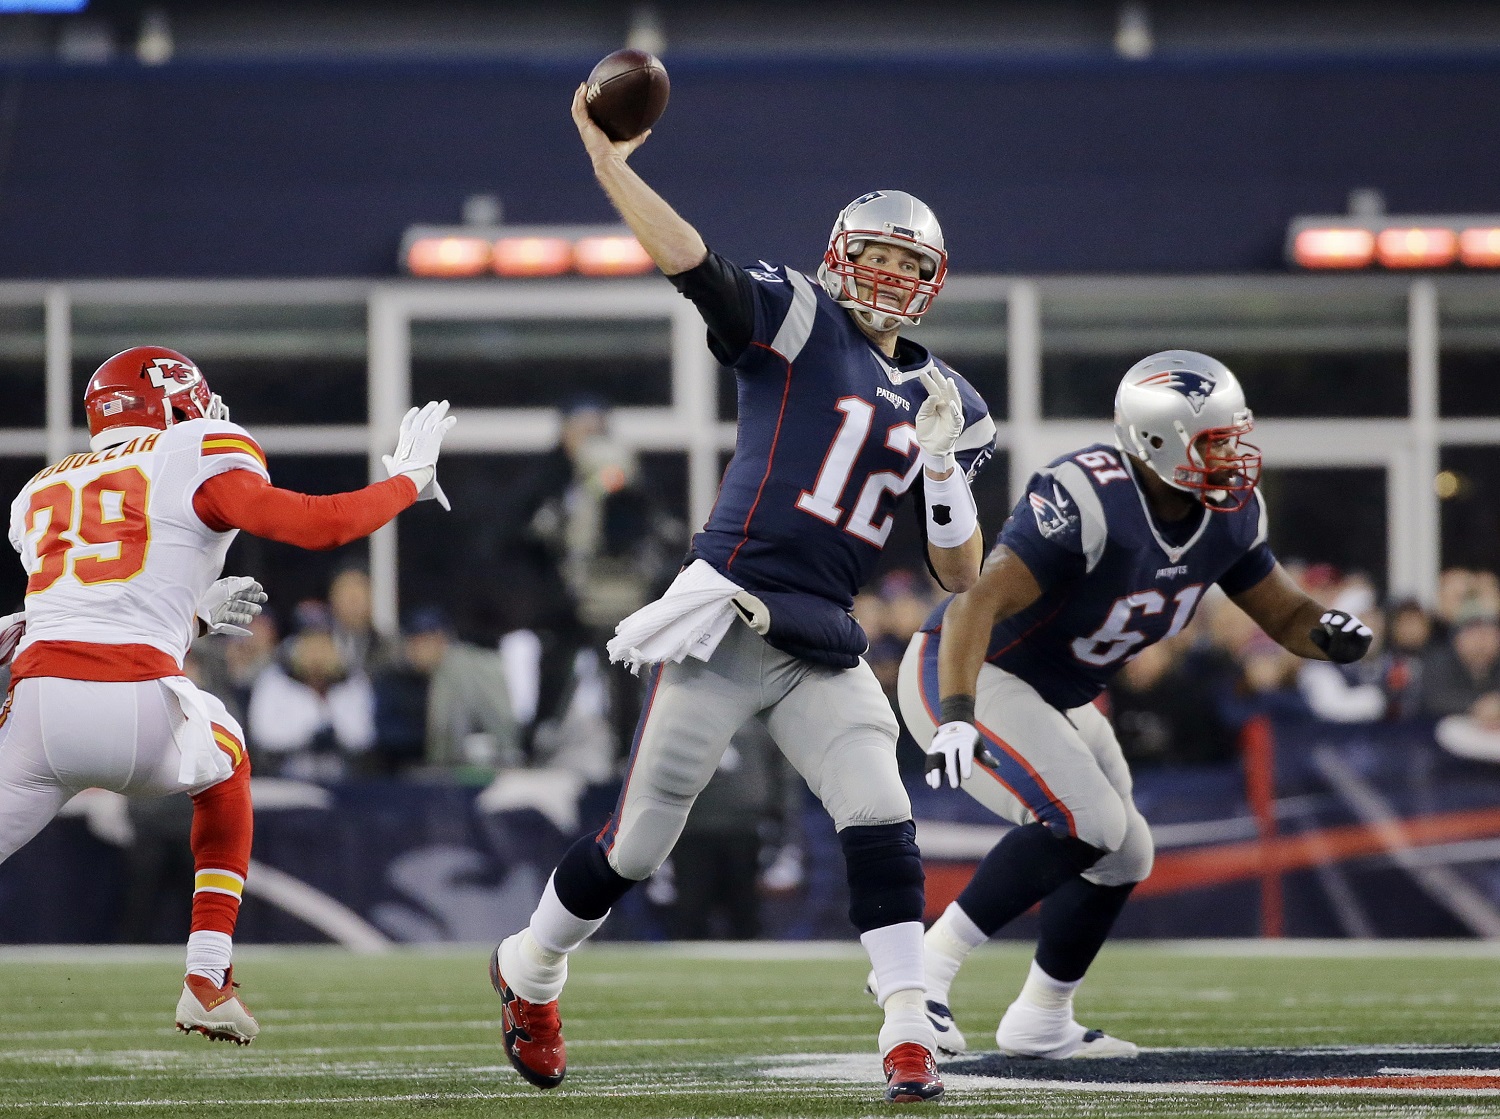 New England Patriots quarterback Tom Brady (12) passes against the Kansas City Chiefs in the first half of an NFL divisional playoff football game, Saturday, Jan. 16, 2016, in Foxborough, Mass. (AP Photo/Elise Amendola)